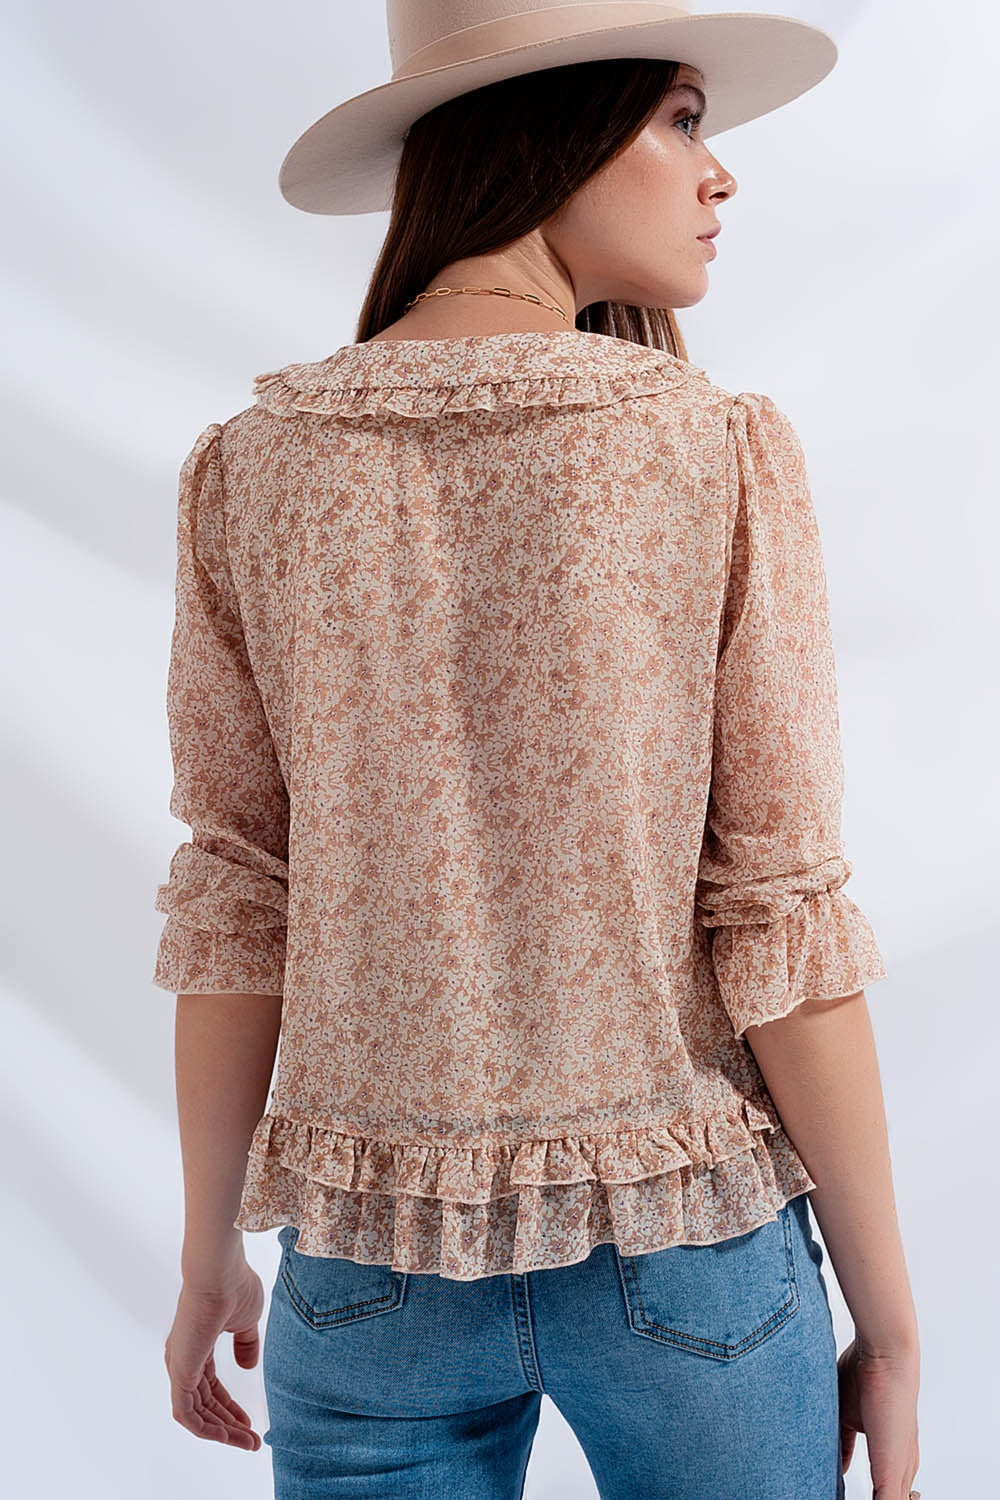 RM Tie Front Chiffon Blouse in Beige Floral Print